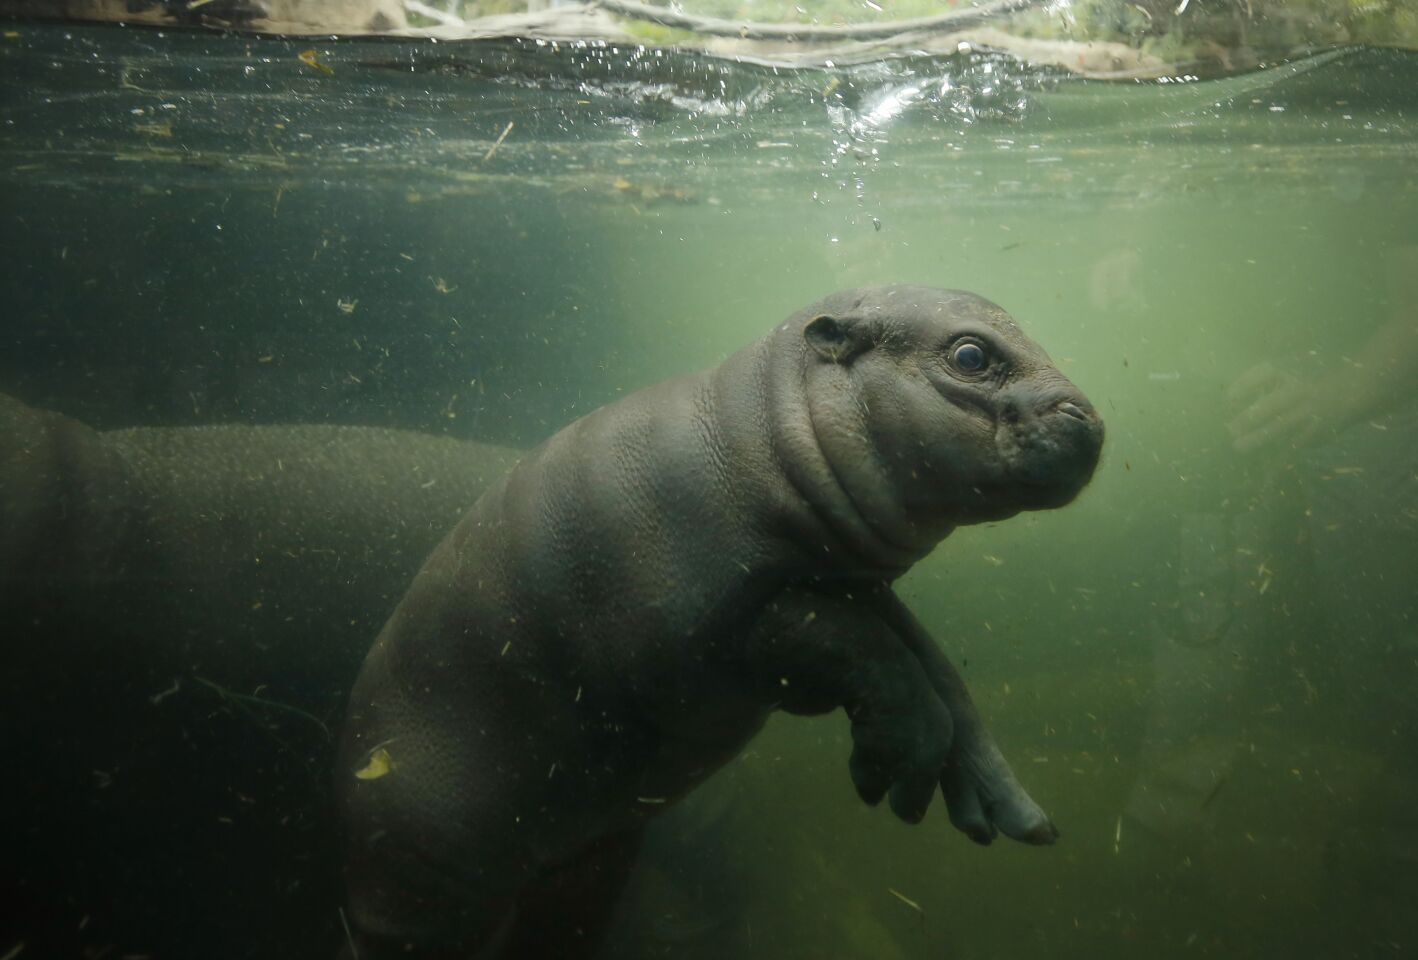 Akobi, a 40-pound, 67-day-old pygmy hippopotamus, swims in the water at the San Diego Zoo on June 15, 2020. Akobi was introduced to the public for the first time as it explored the main exhibit for the first time Monday.